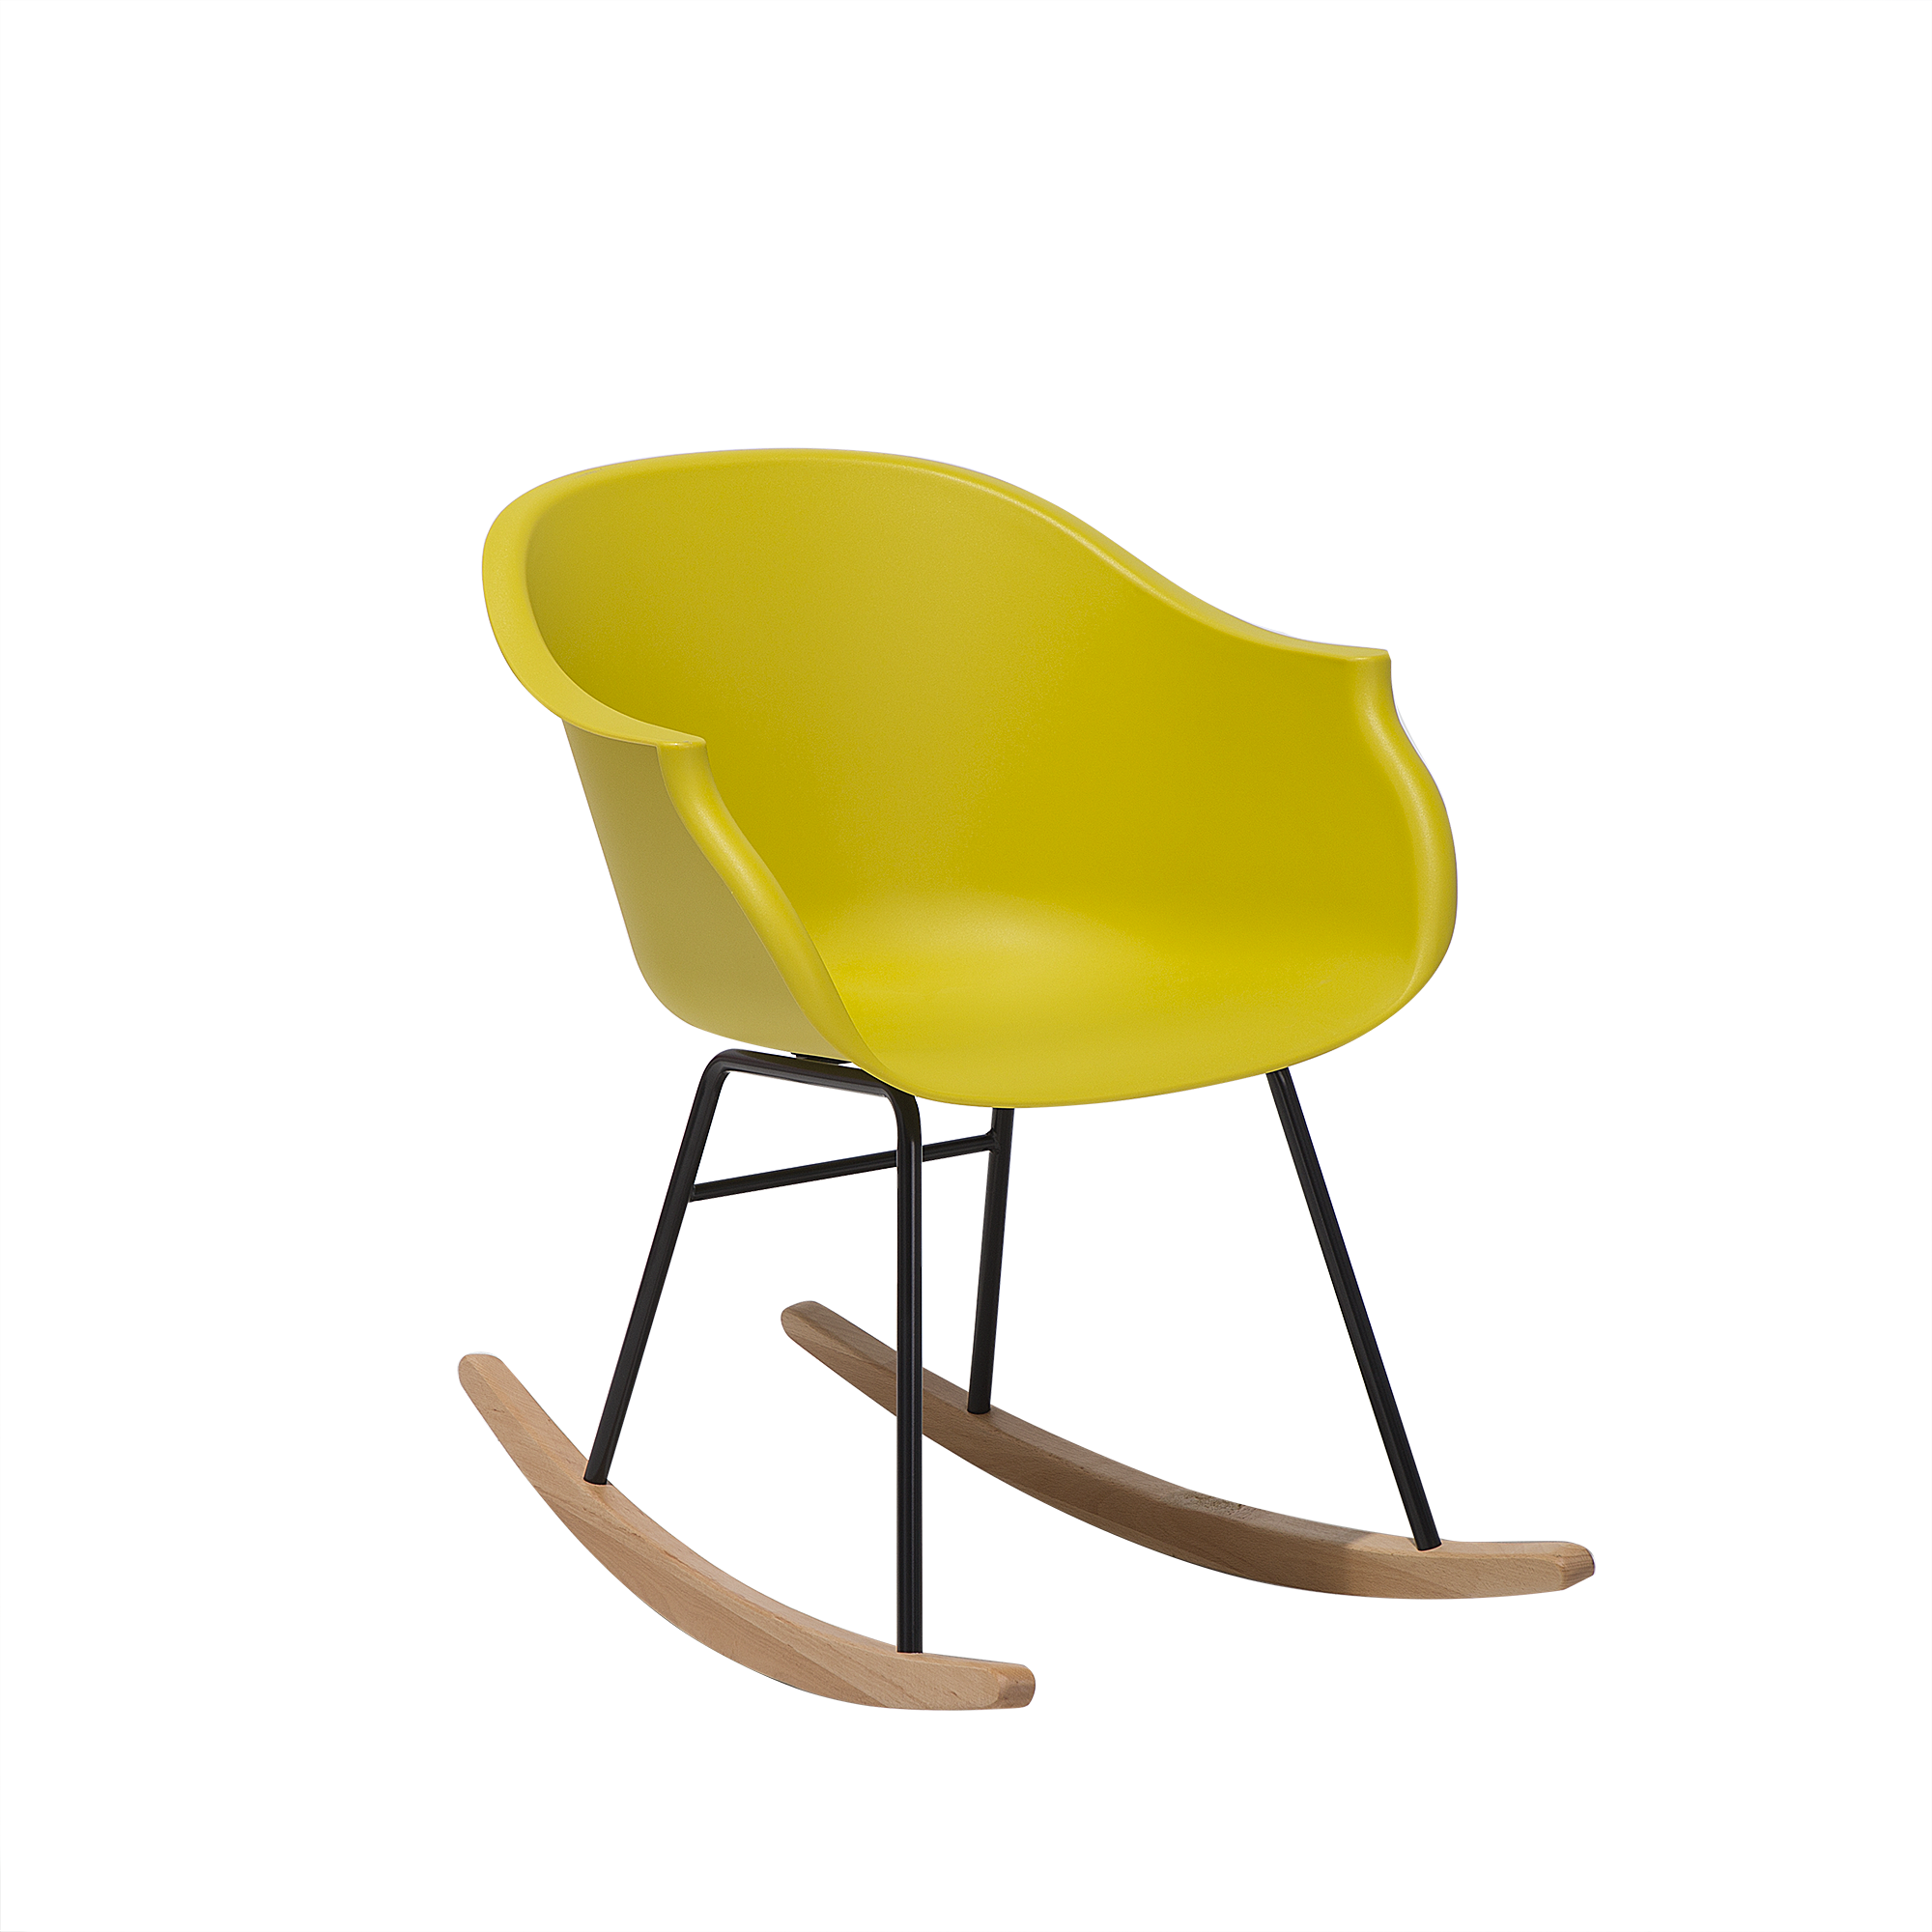 Beliani Rocking Chair Yellow Synthetic Material Metal Legs Shell Seat Solid Wood Skates Modern Style